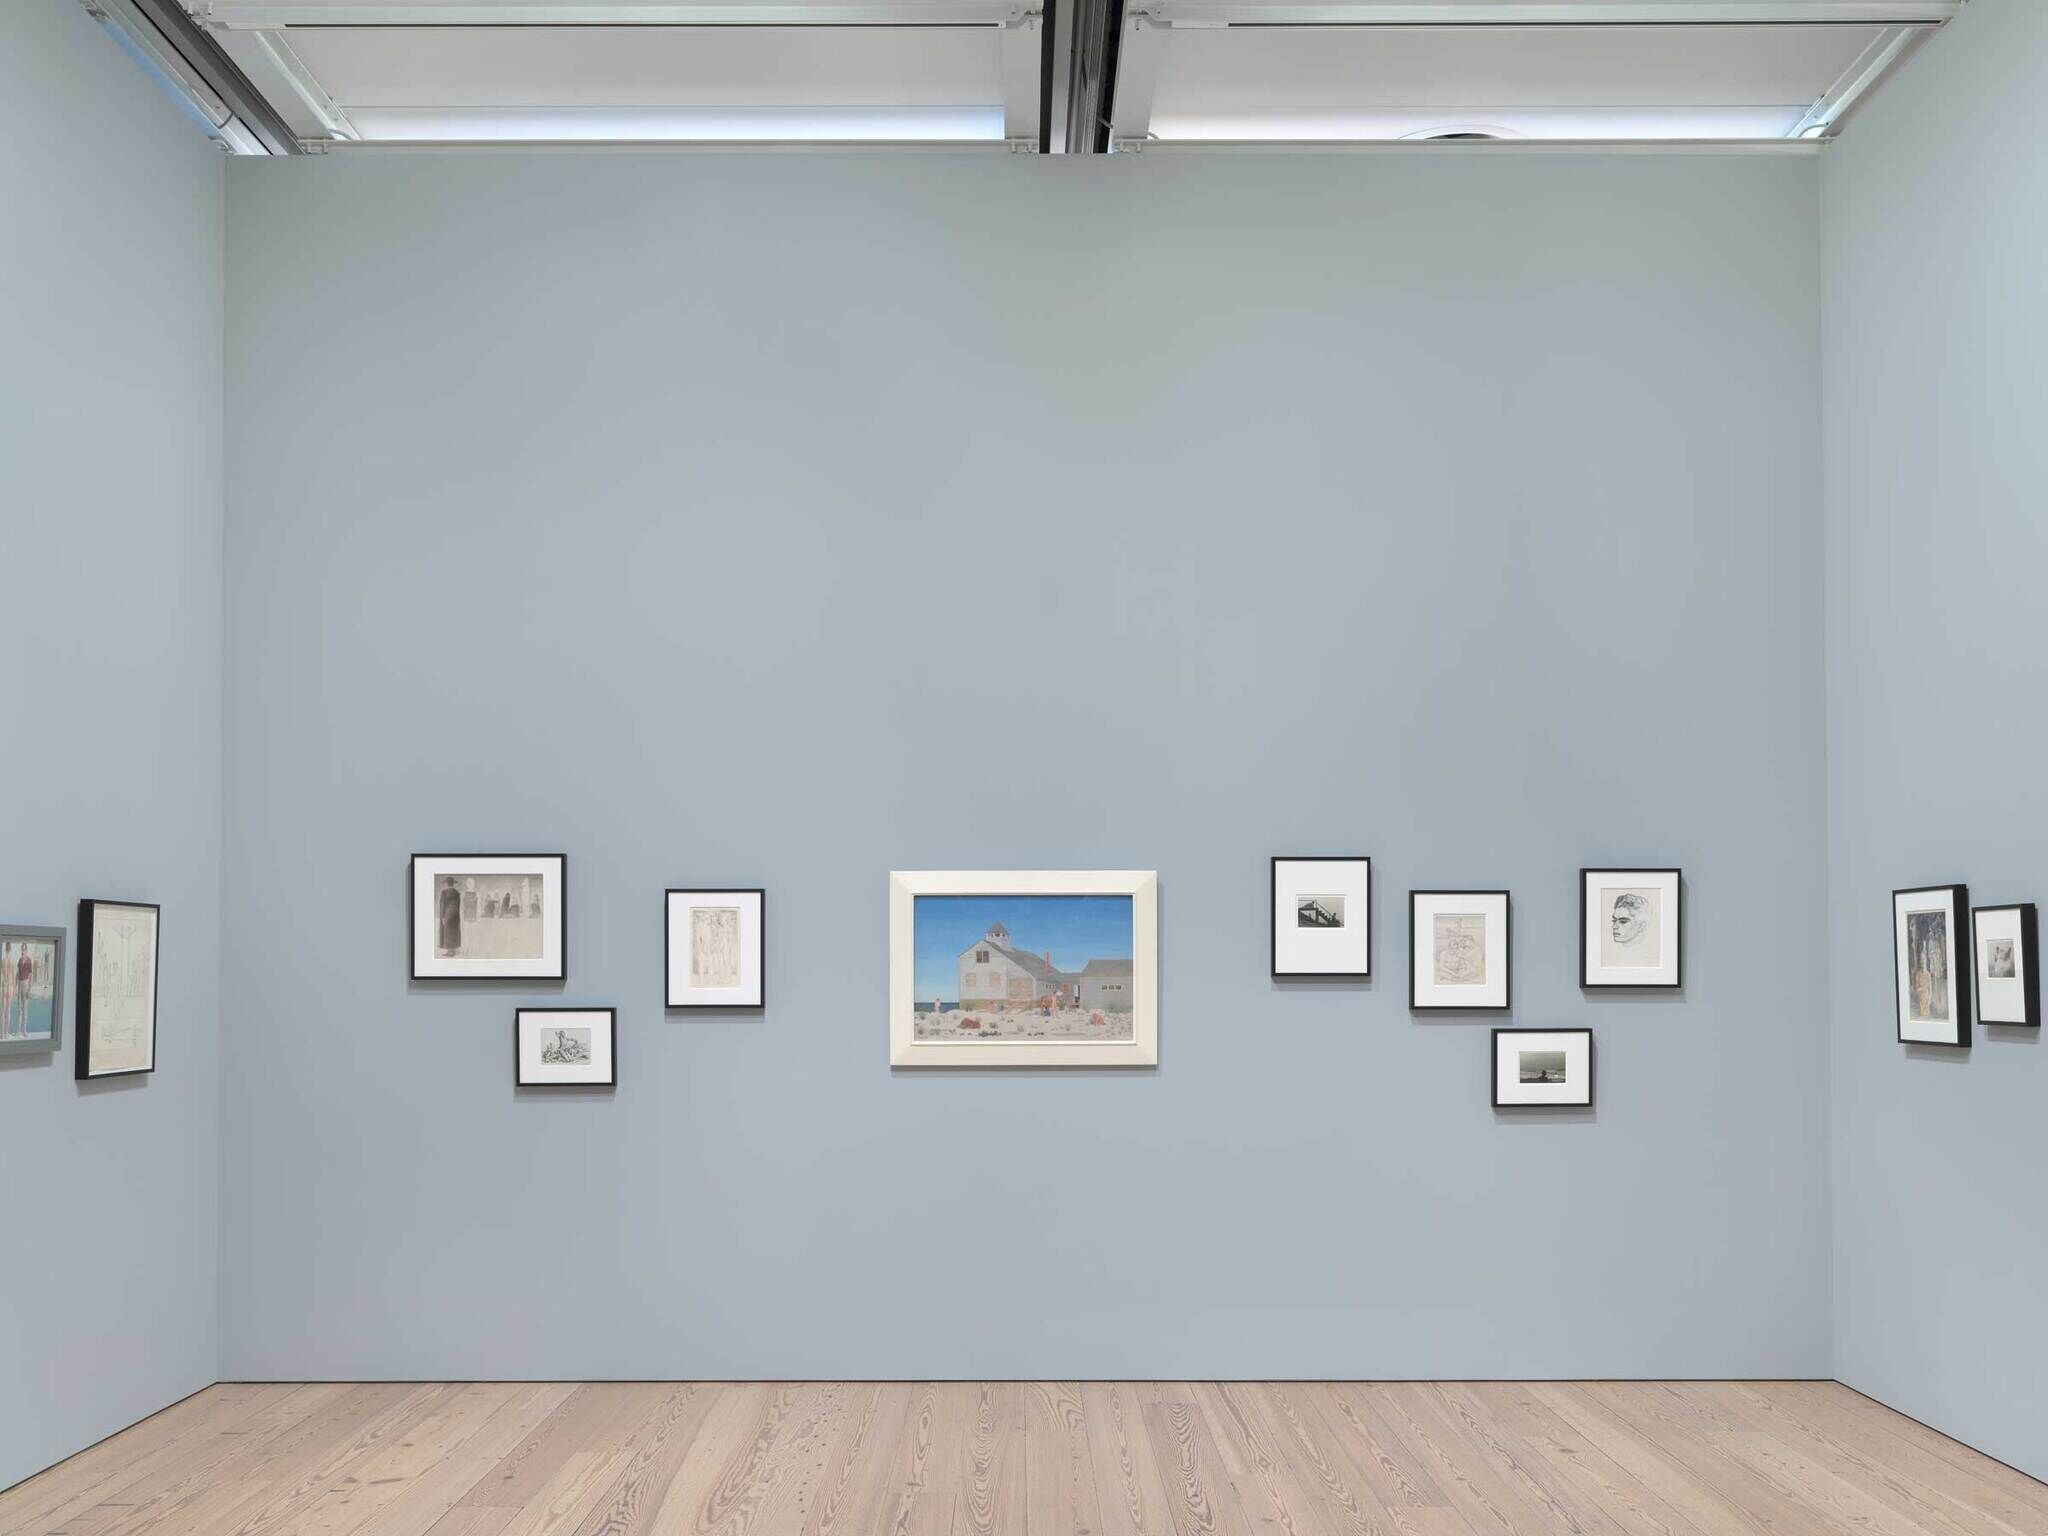 Art gallery interior with framed artworks on a light blue wall and wooden flooring.